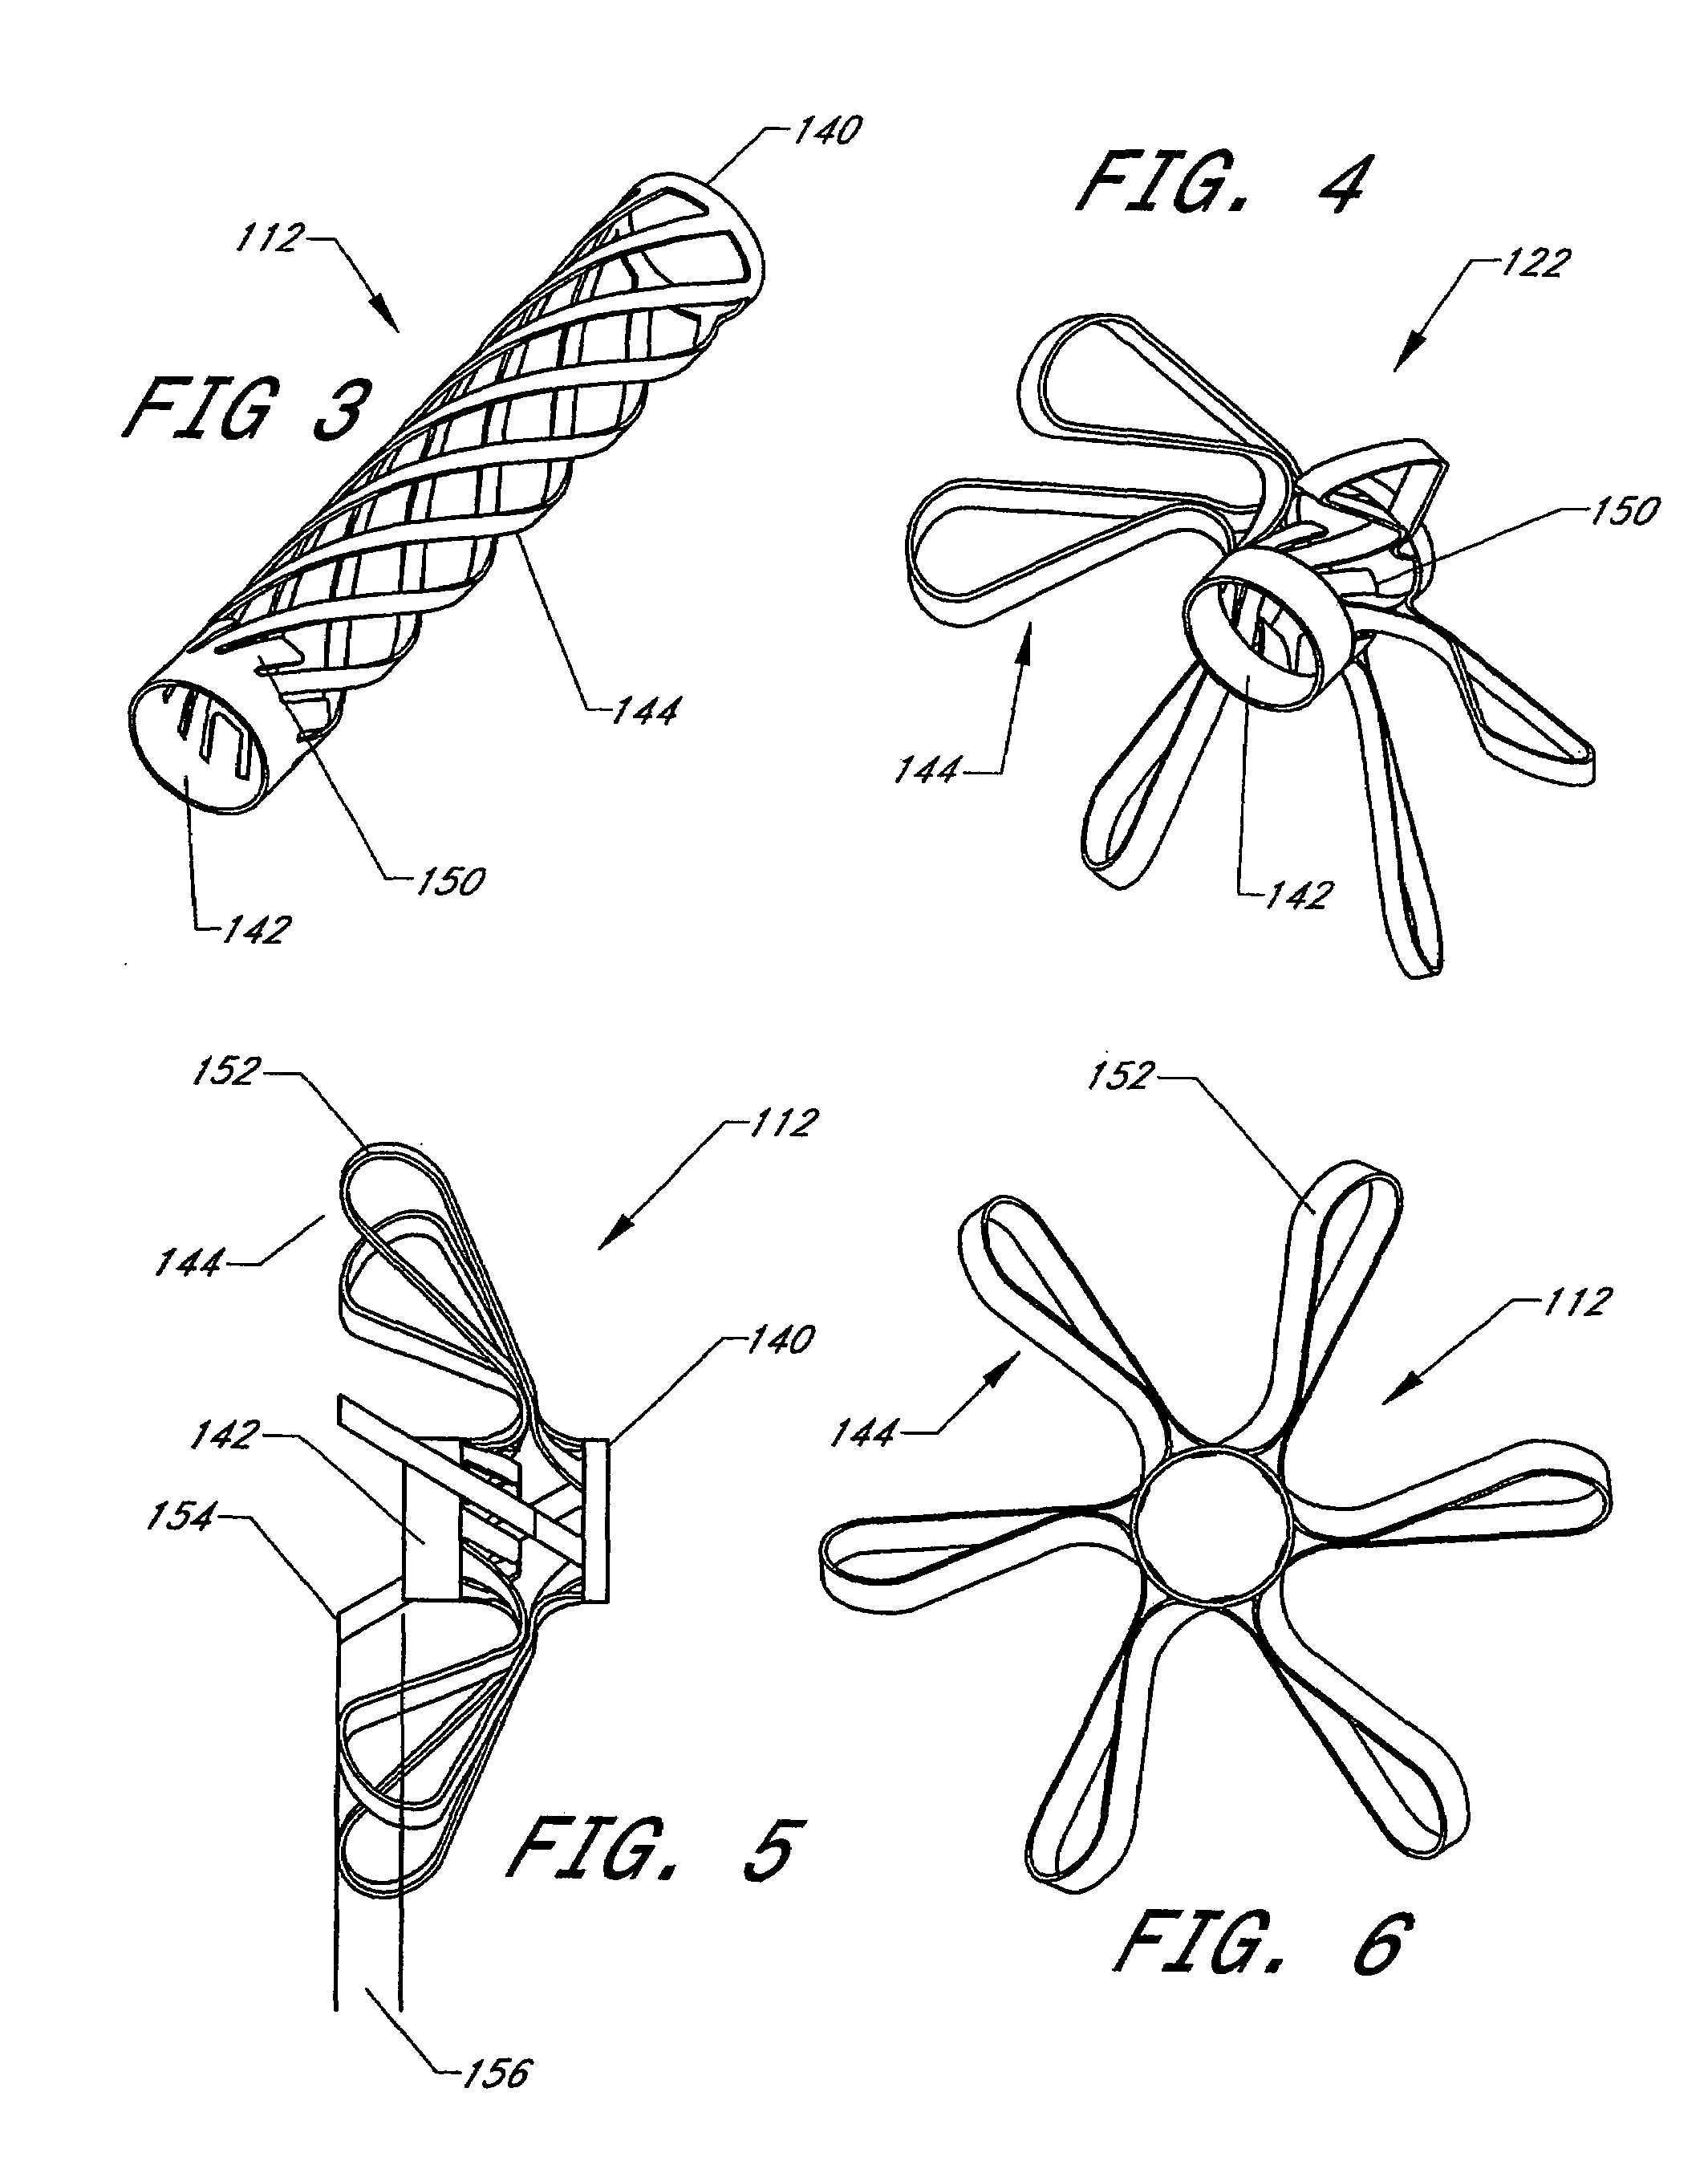 Implantable pressure transducer system optimized for anchoring and positioning